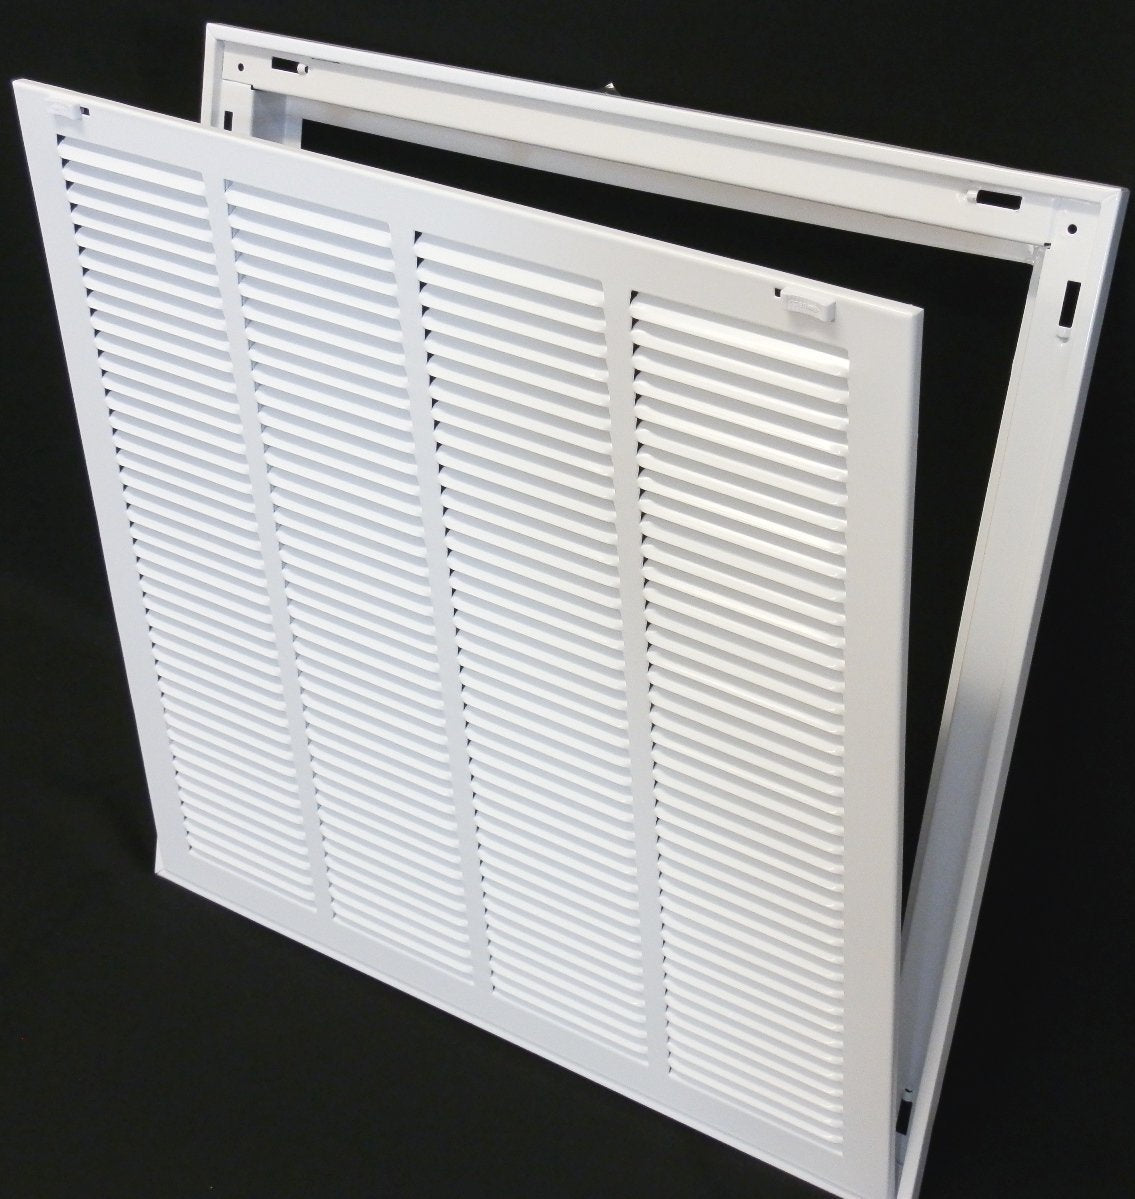 32&quot; X 24&quot; Steel Return Air Filter Grille for 1&quot; Filter - Removable Frame - [Outer Dimensions: 34 5/8&quot; X 26 5/8&quot;]